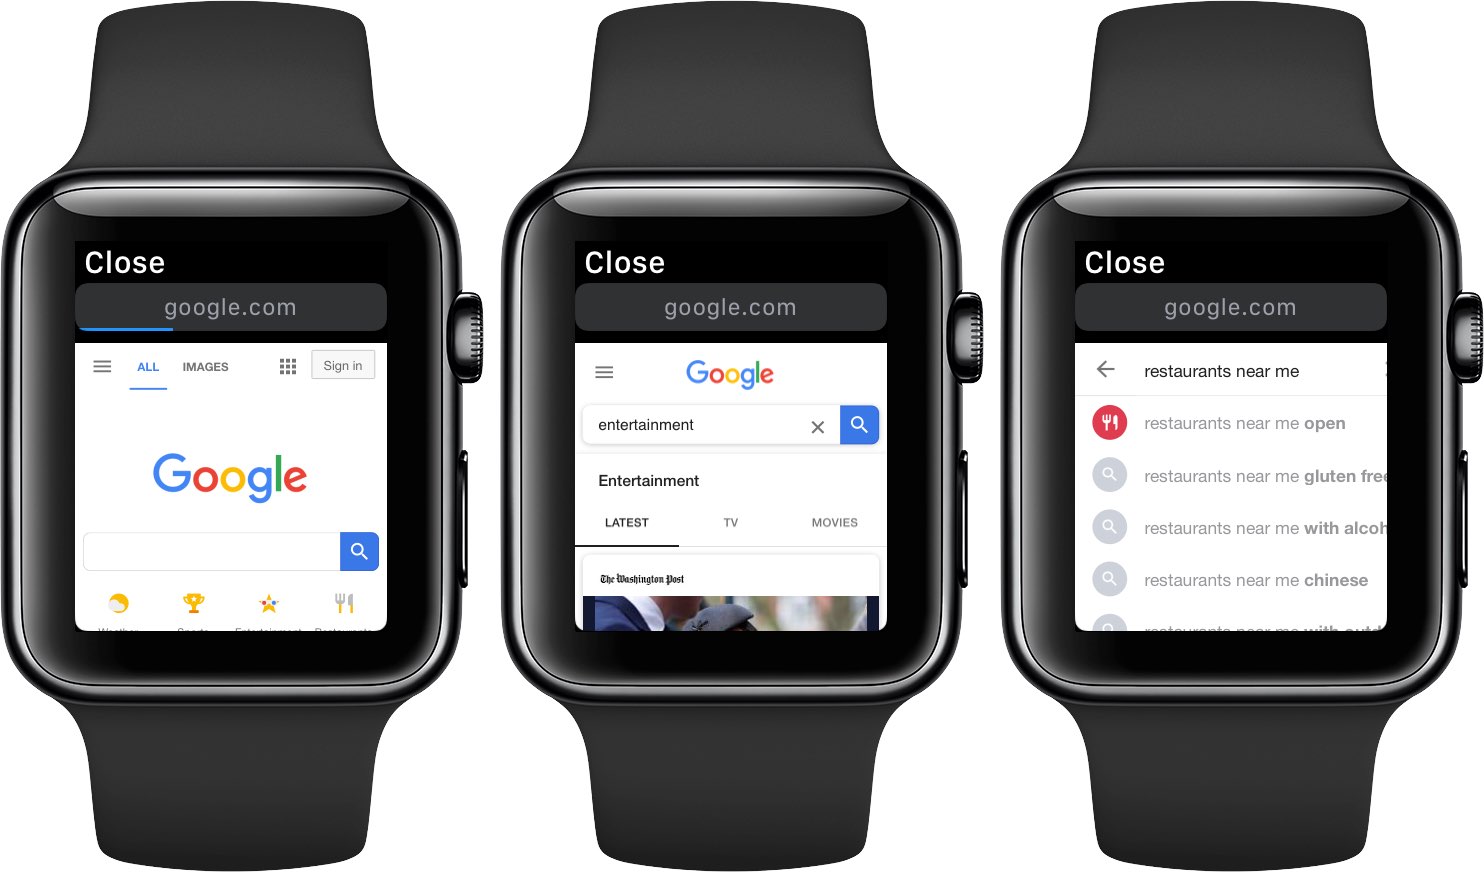 Browsing the web with Google on watchOS 5